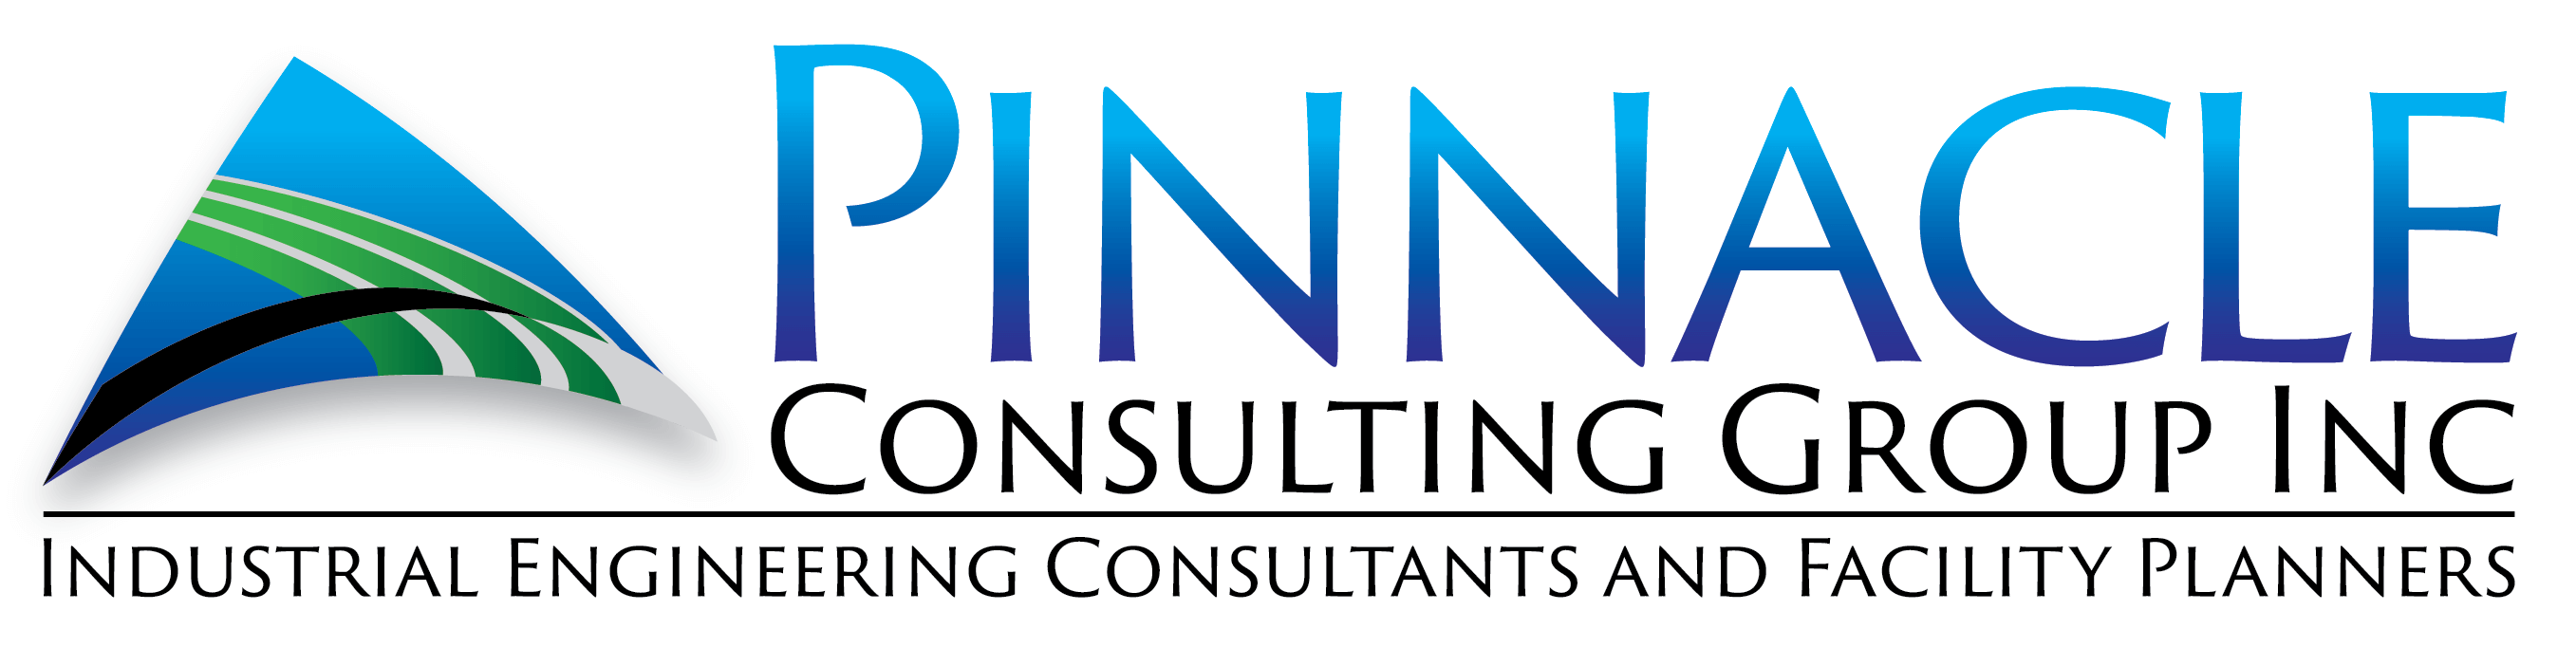 The Pinnacle Consulting Group